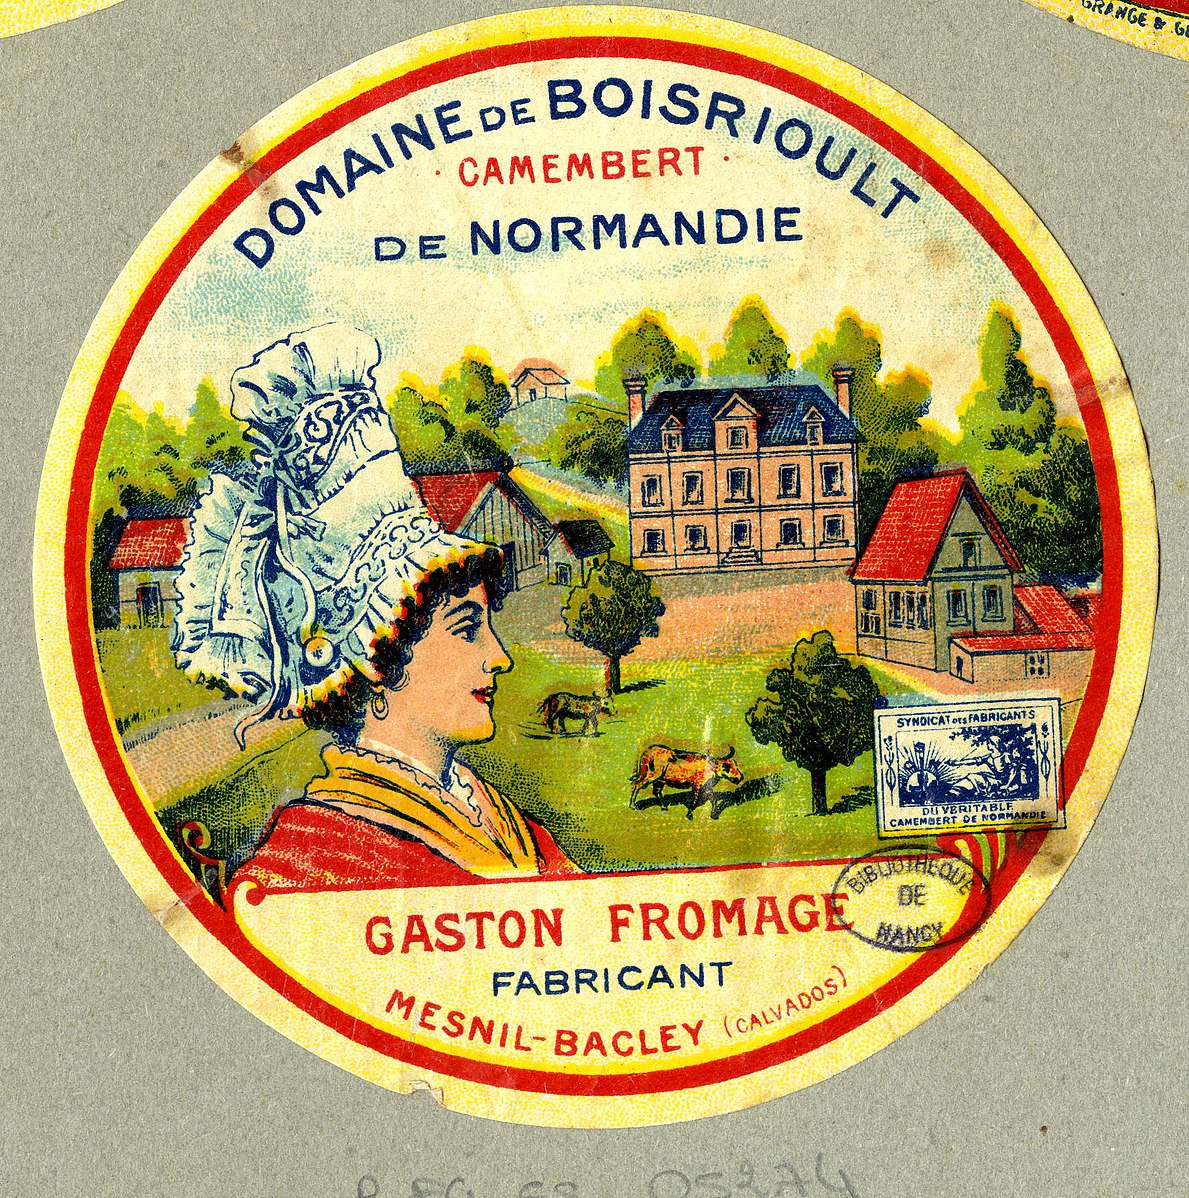 Historic packing of official Camembert from the French region of Normandy, featuring a French woman on a farm with French national colors.